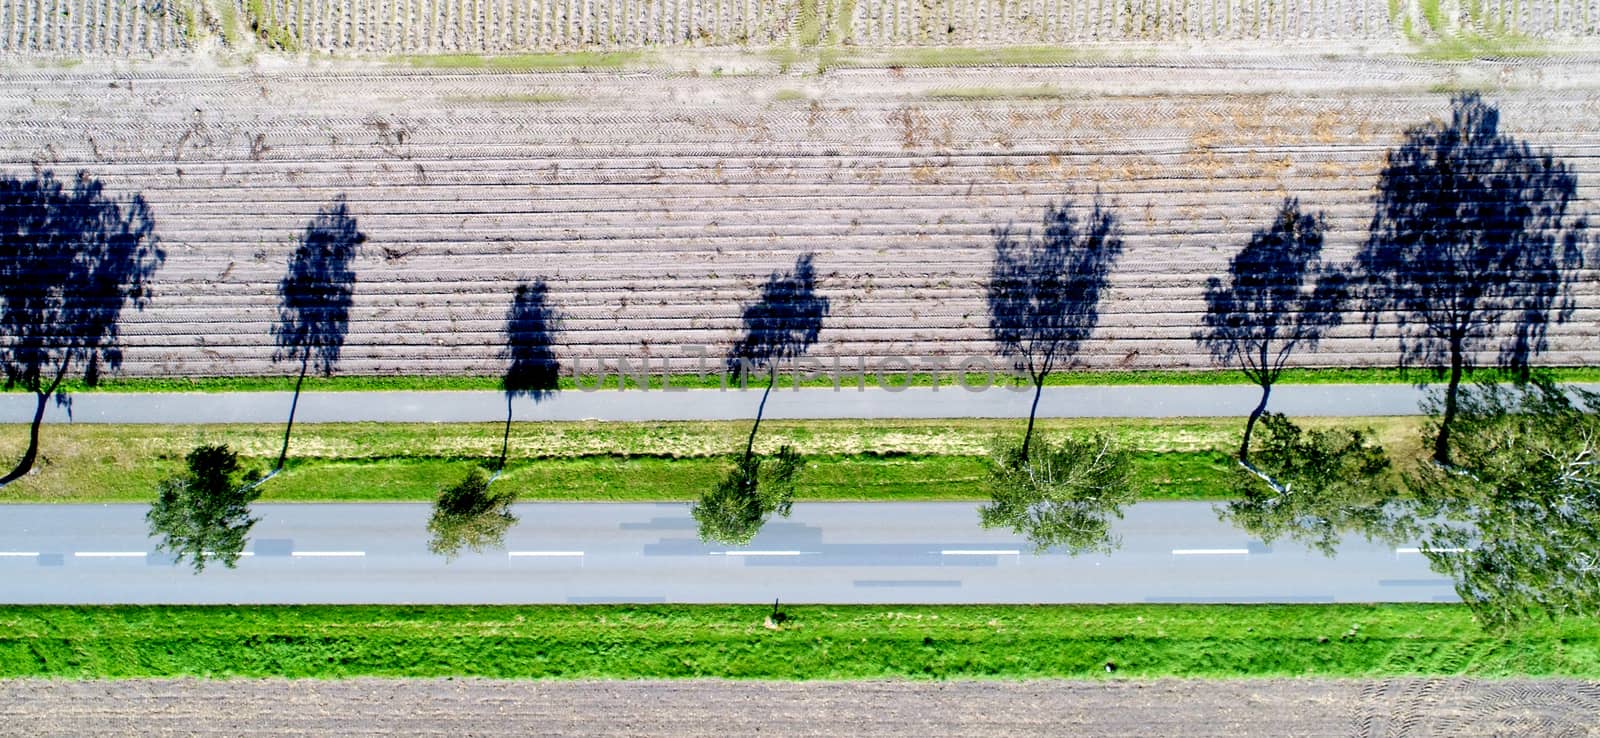 Vertical aerial image, trees on the roadside, strong shadows, abstract effect